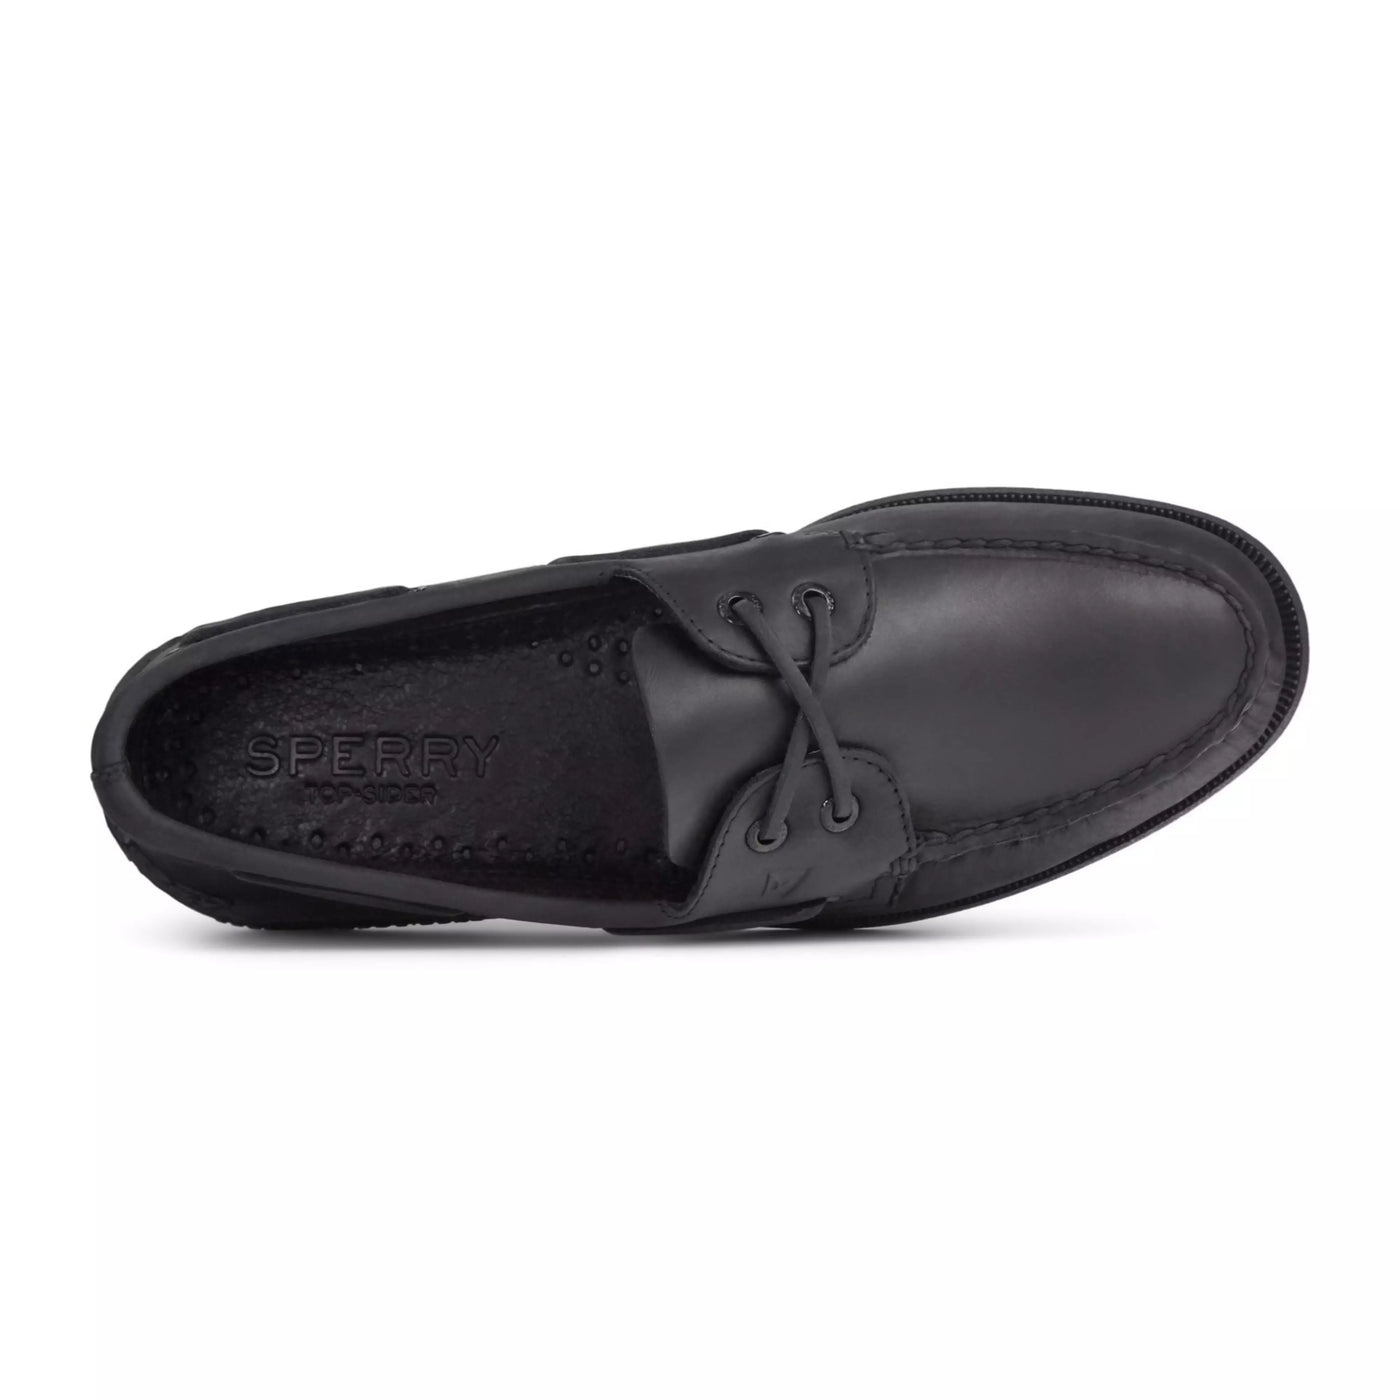 Black Authentic Original Leather Boat Shoe - Sperry - The Slipper Box